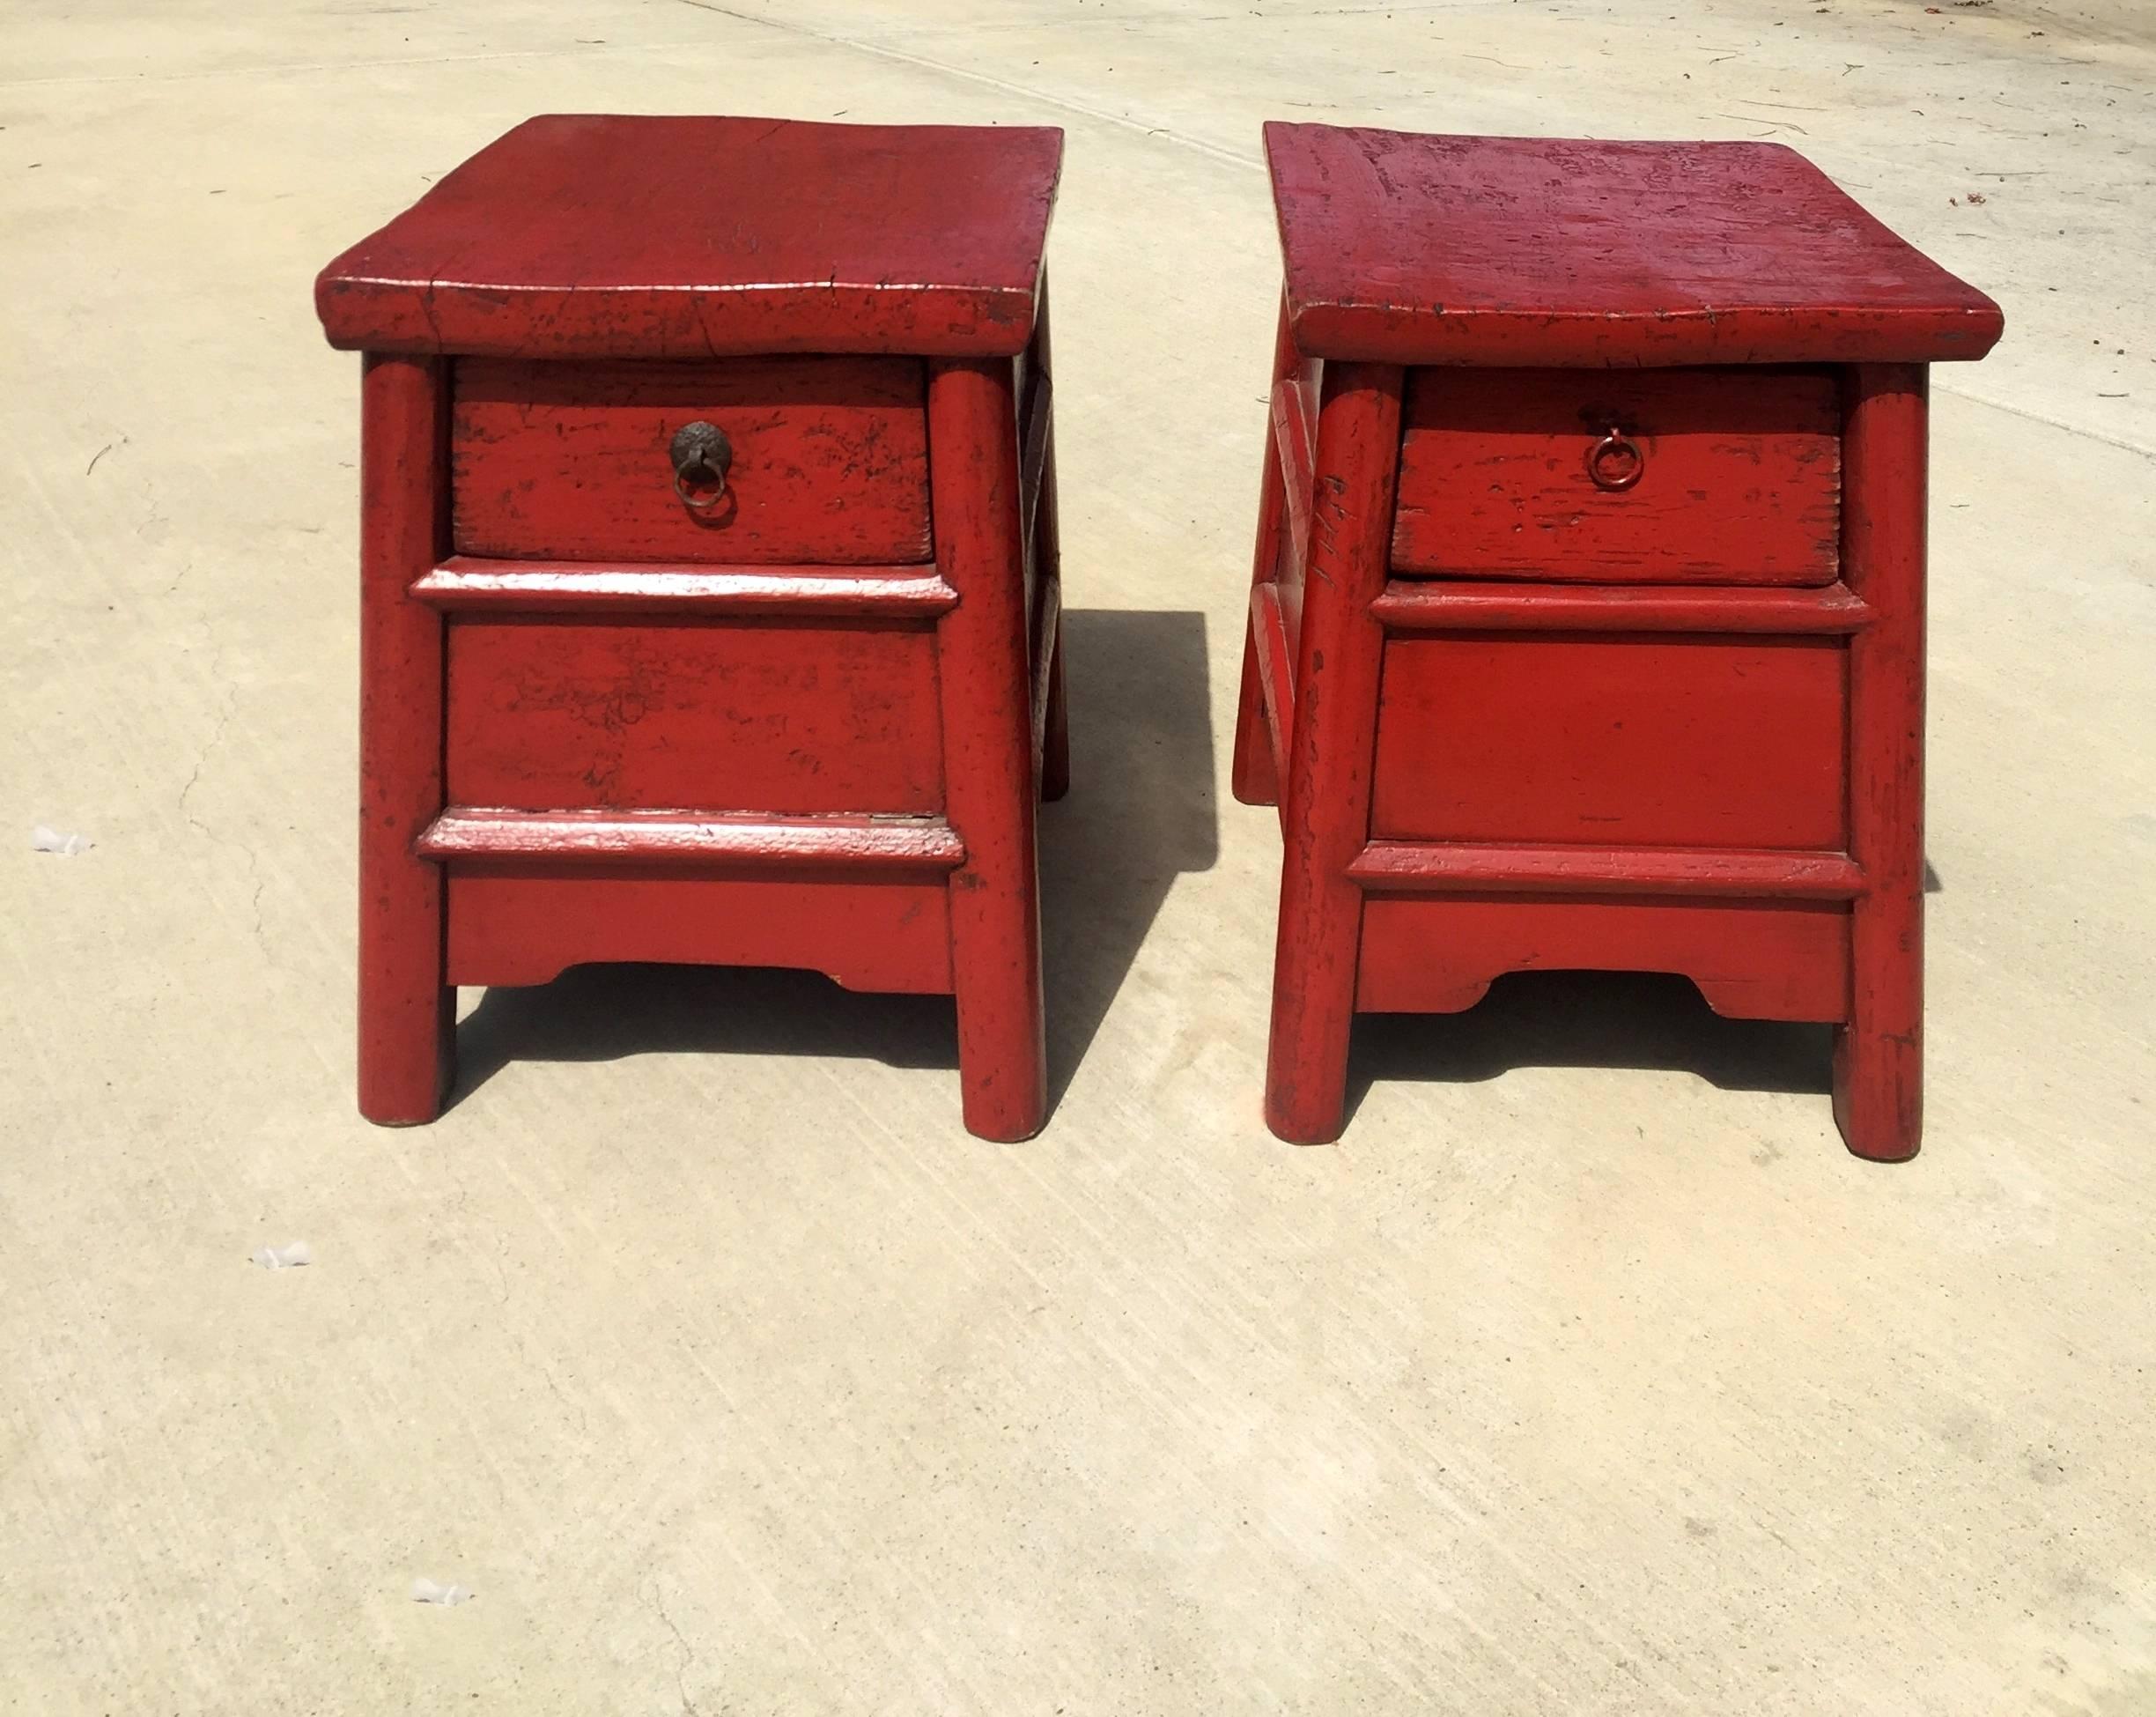 A pair of antique stools from Northern China. Beautiful red lacquer stool has wonderful, rustic country charm. With drawer and secret compartment under the drawer, the stool is also a chest to storage secret items. Thick single board makes the top.